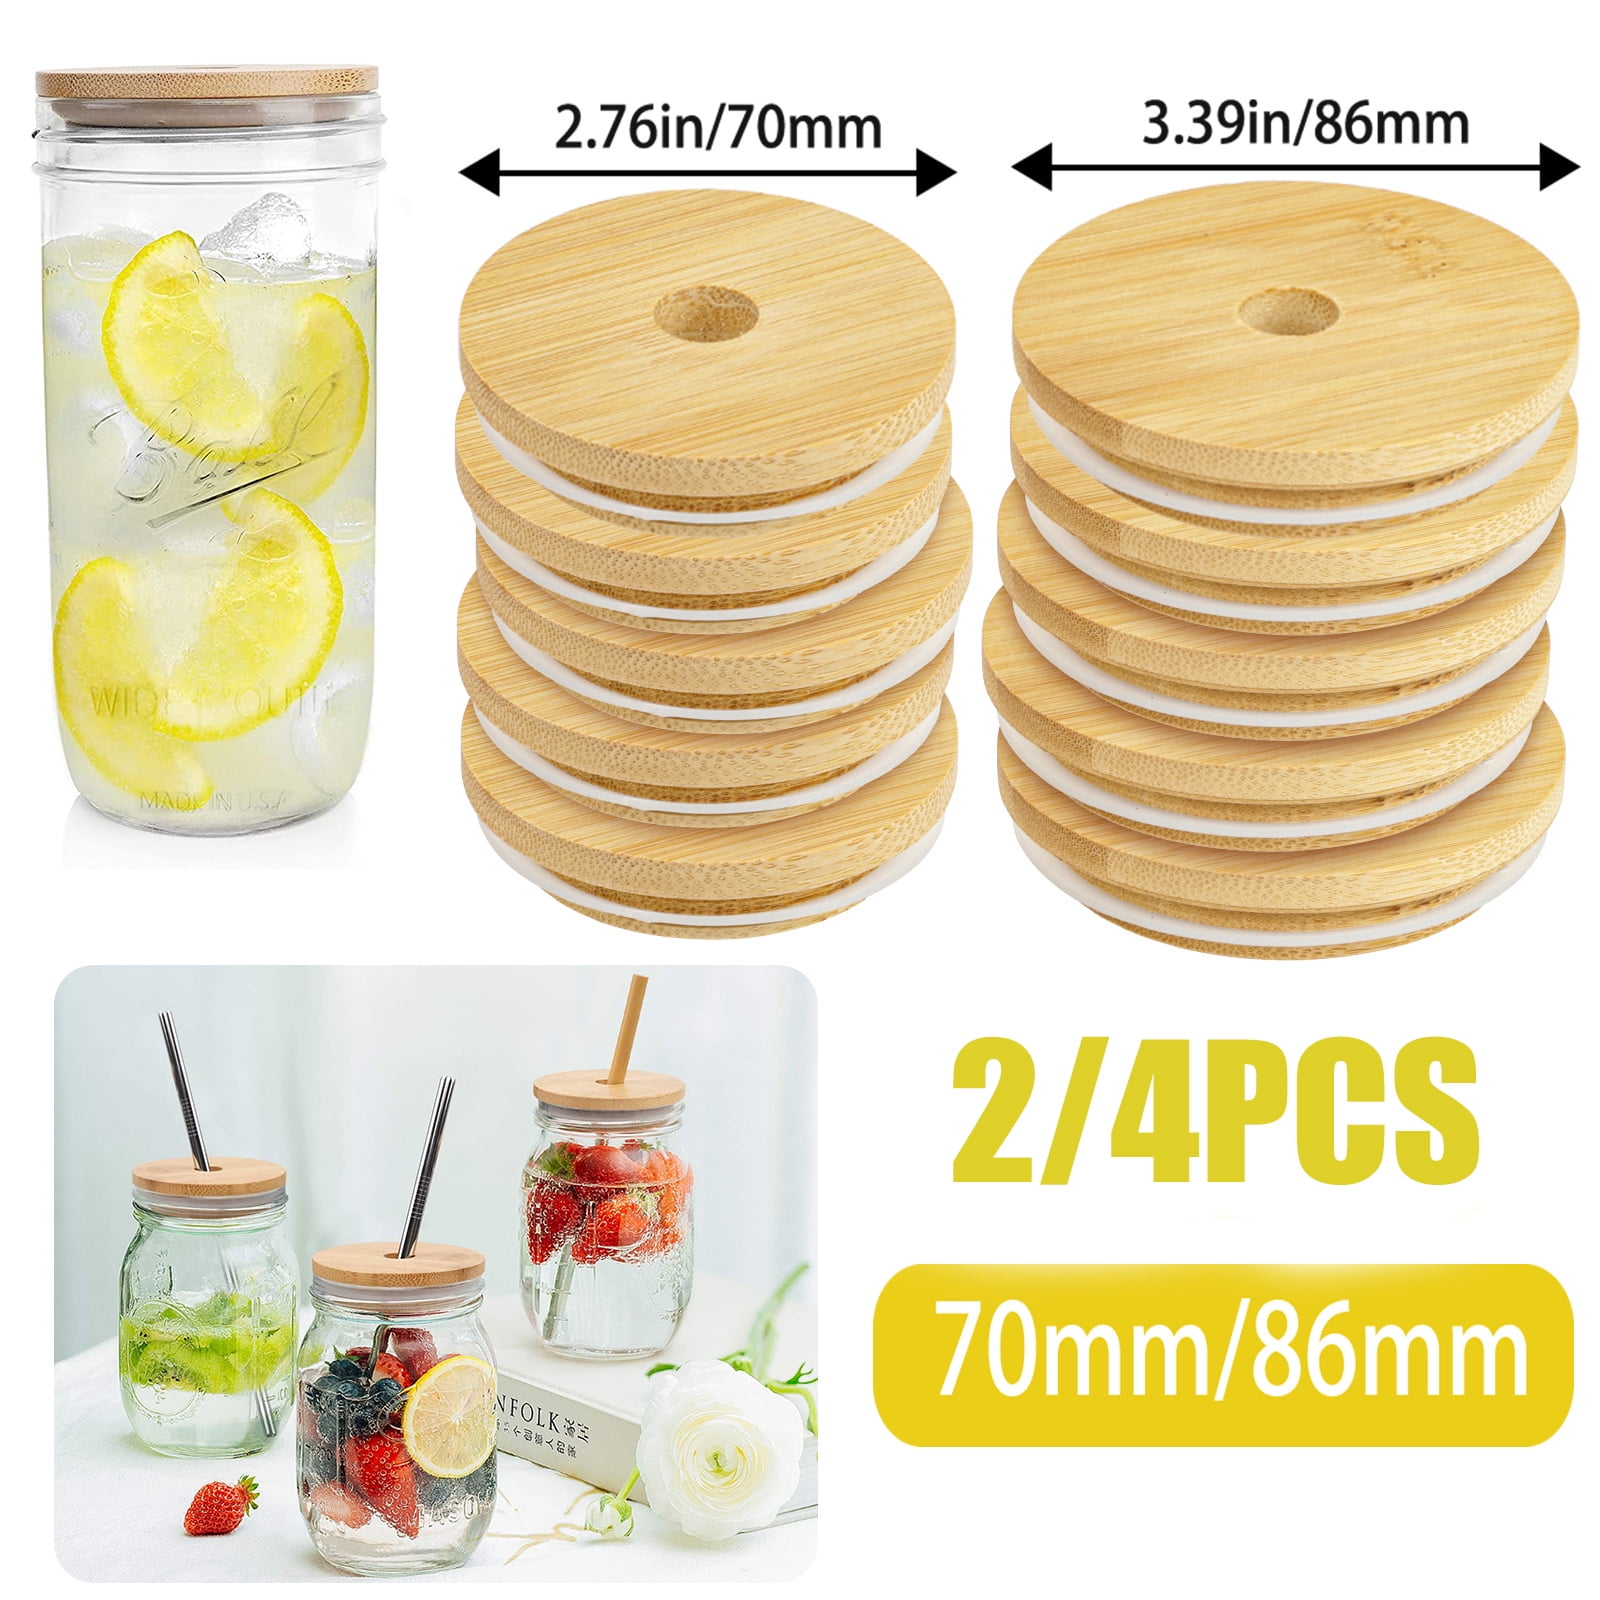 inhzoy 4 Pack Eco-friendly Bamboo Regular/Wide Mouth Mason Jar Lids Reusable Sealing Storage Caps with Straw Hole 4Pcs Light Wood Color 52mm 